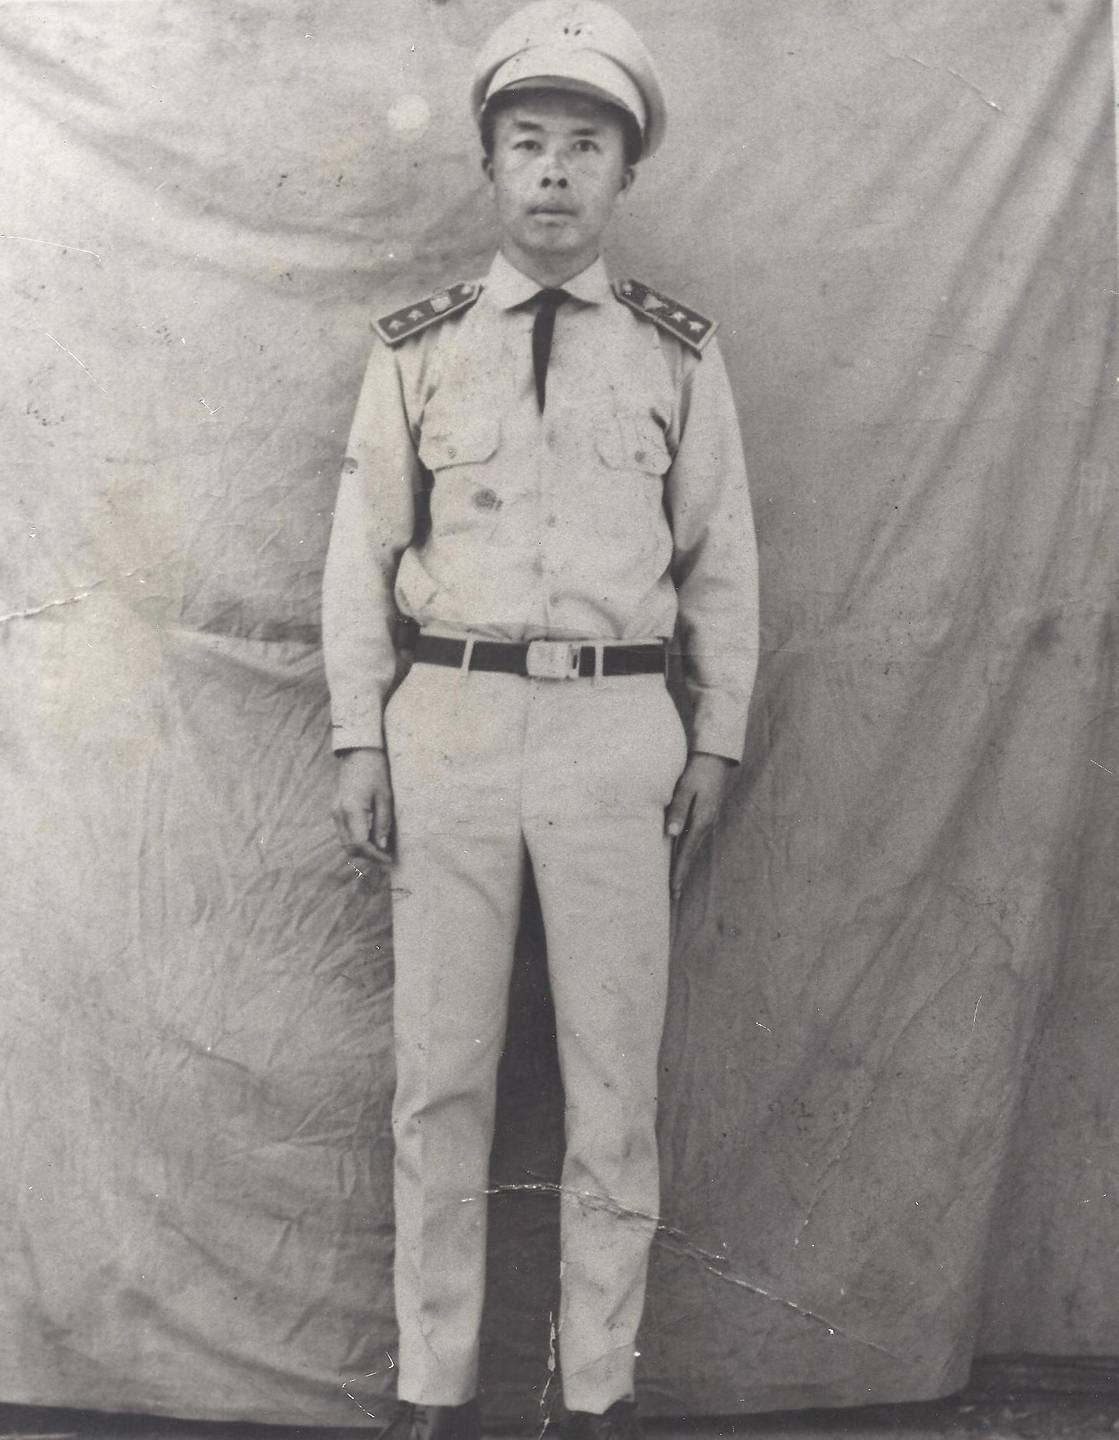 An Asian man in uniform standing against wrinkled canvas backdrop.